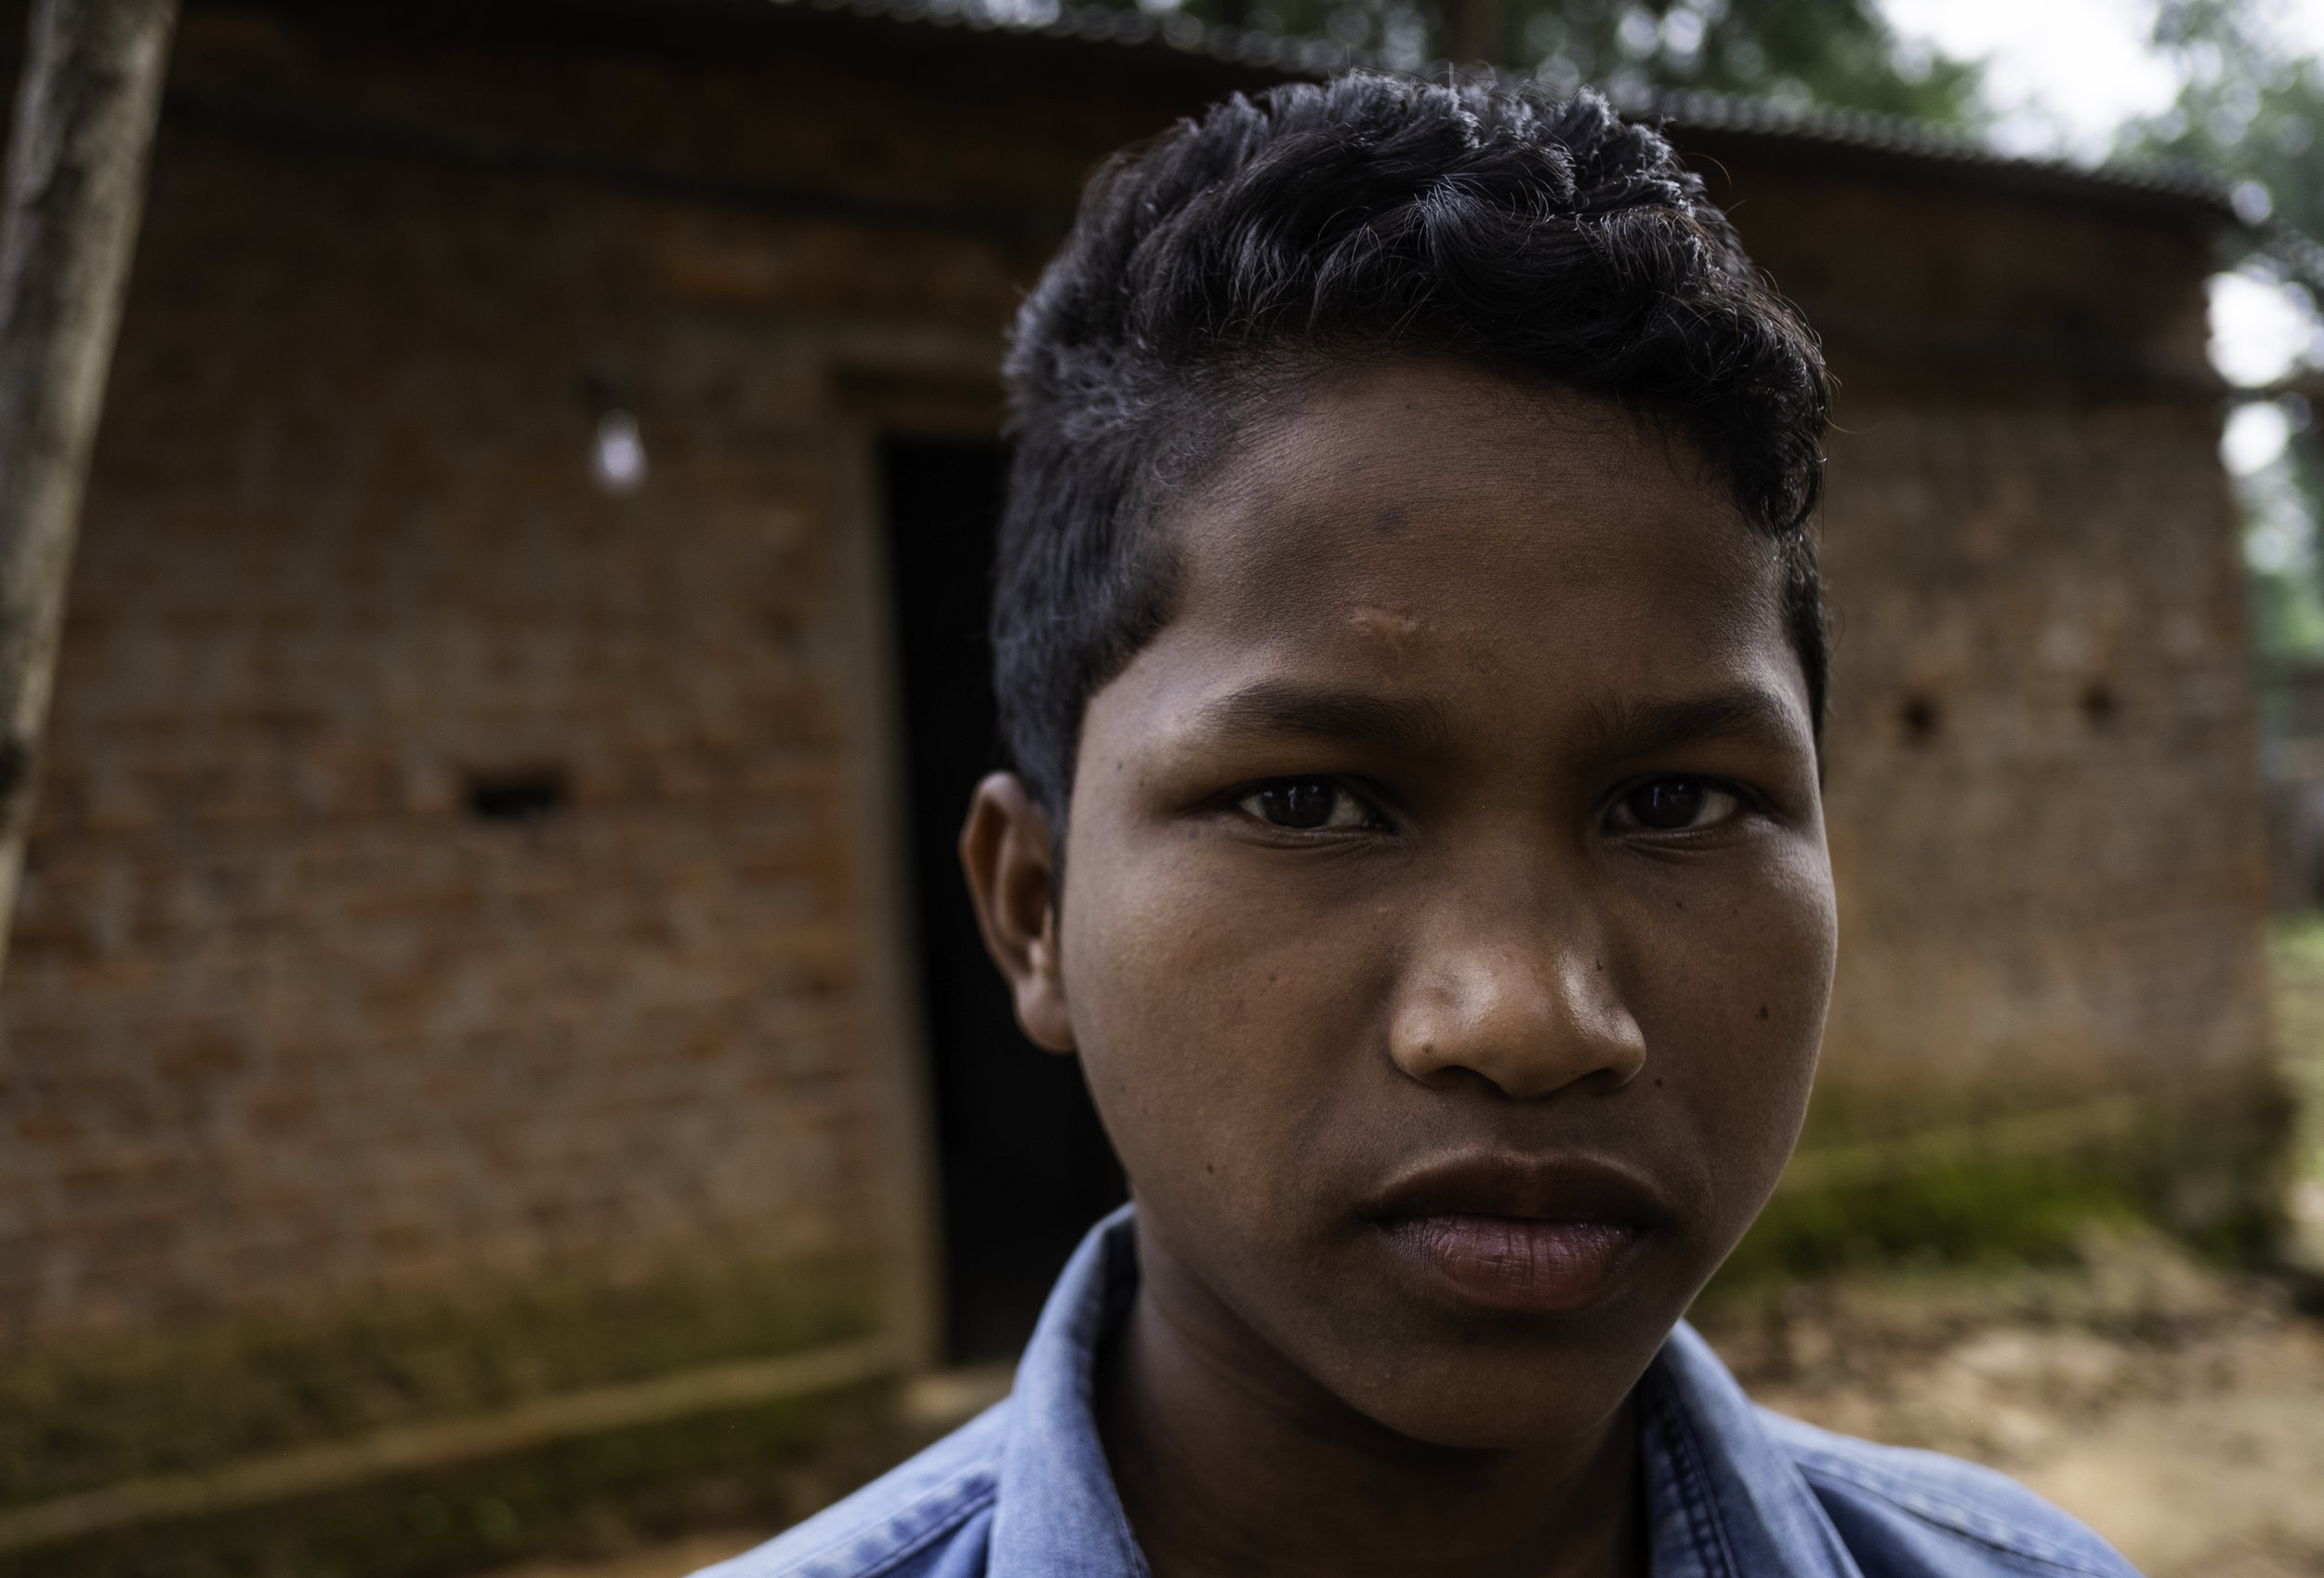   A young orphan in Kandhamal India stands in front of the schoolhouse where he learns and sleeps in. During the Summer of 2008, his parents were killed by Hindu nationalists because of their Christian faith. He and many other orphaned children have 